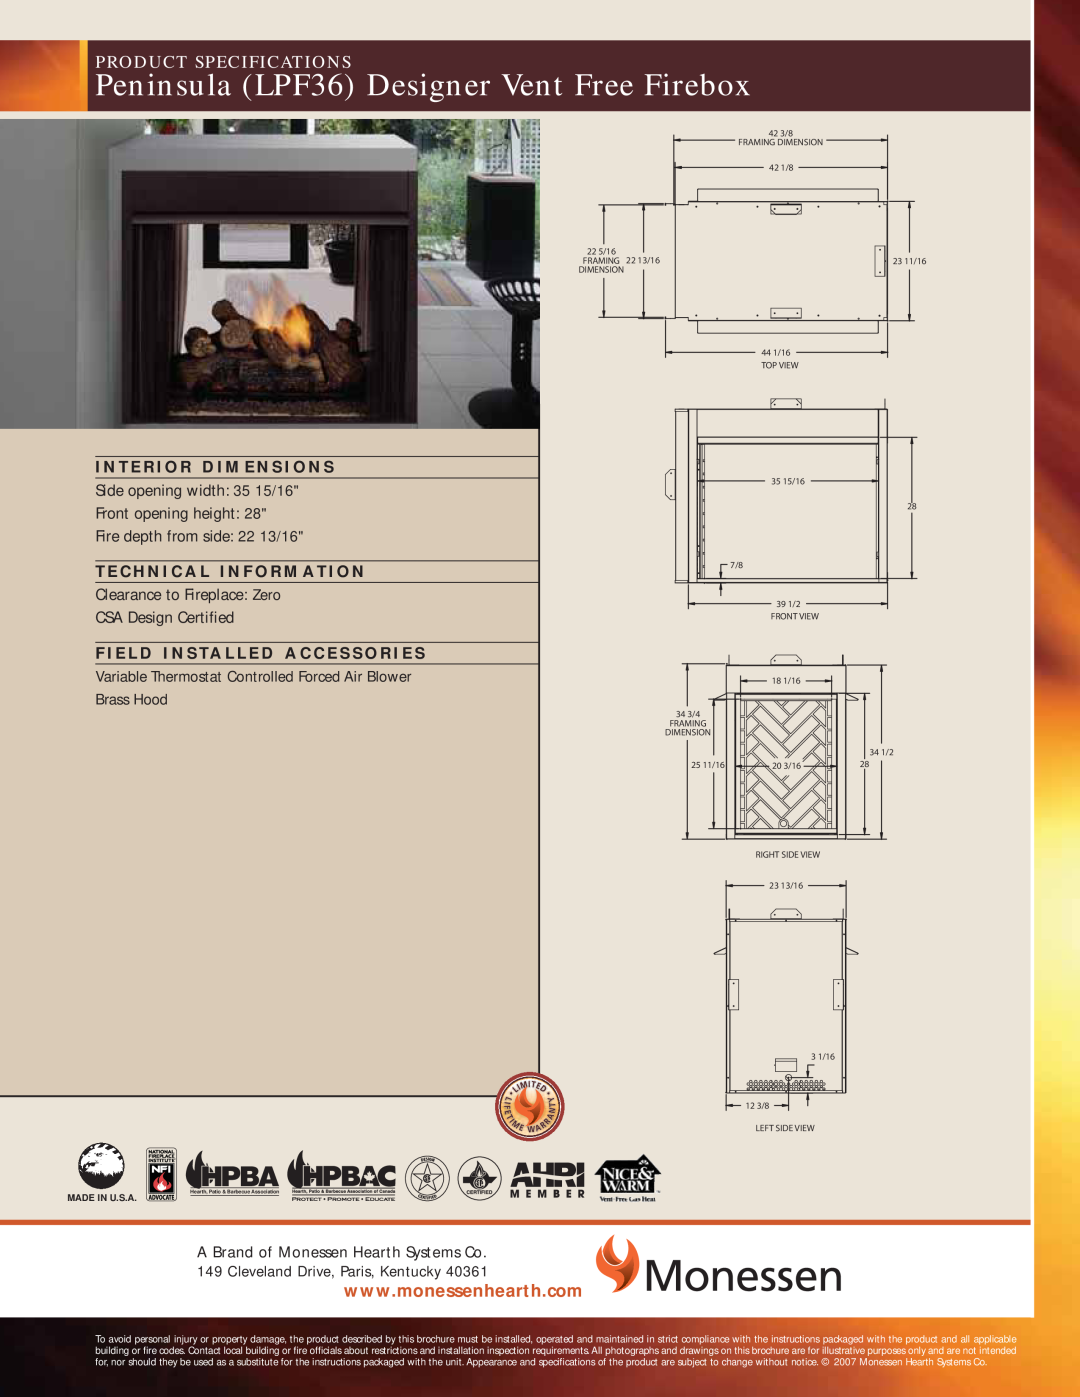 Monessen Hearth specifications Peninsula LPF36 Designer Vent Free Firebox, Product Specifications, Front opening height 